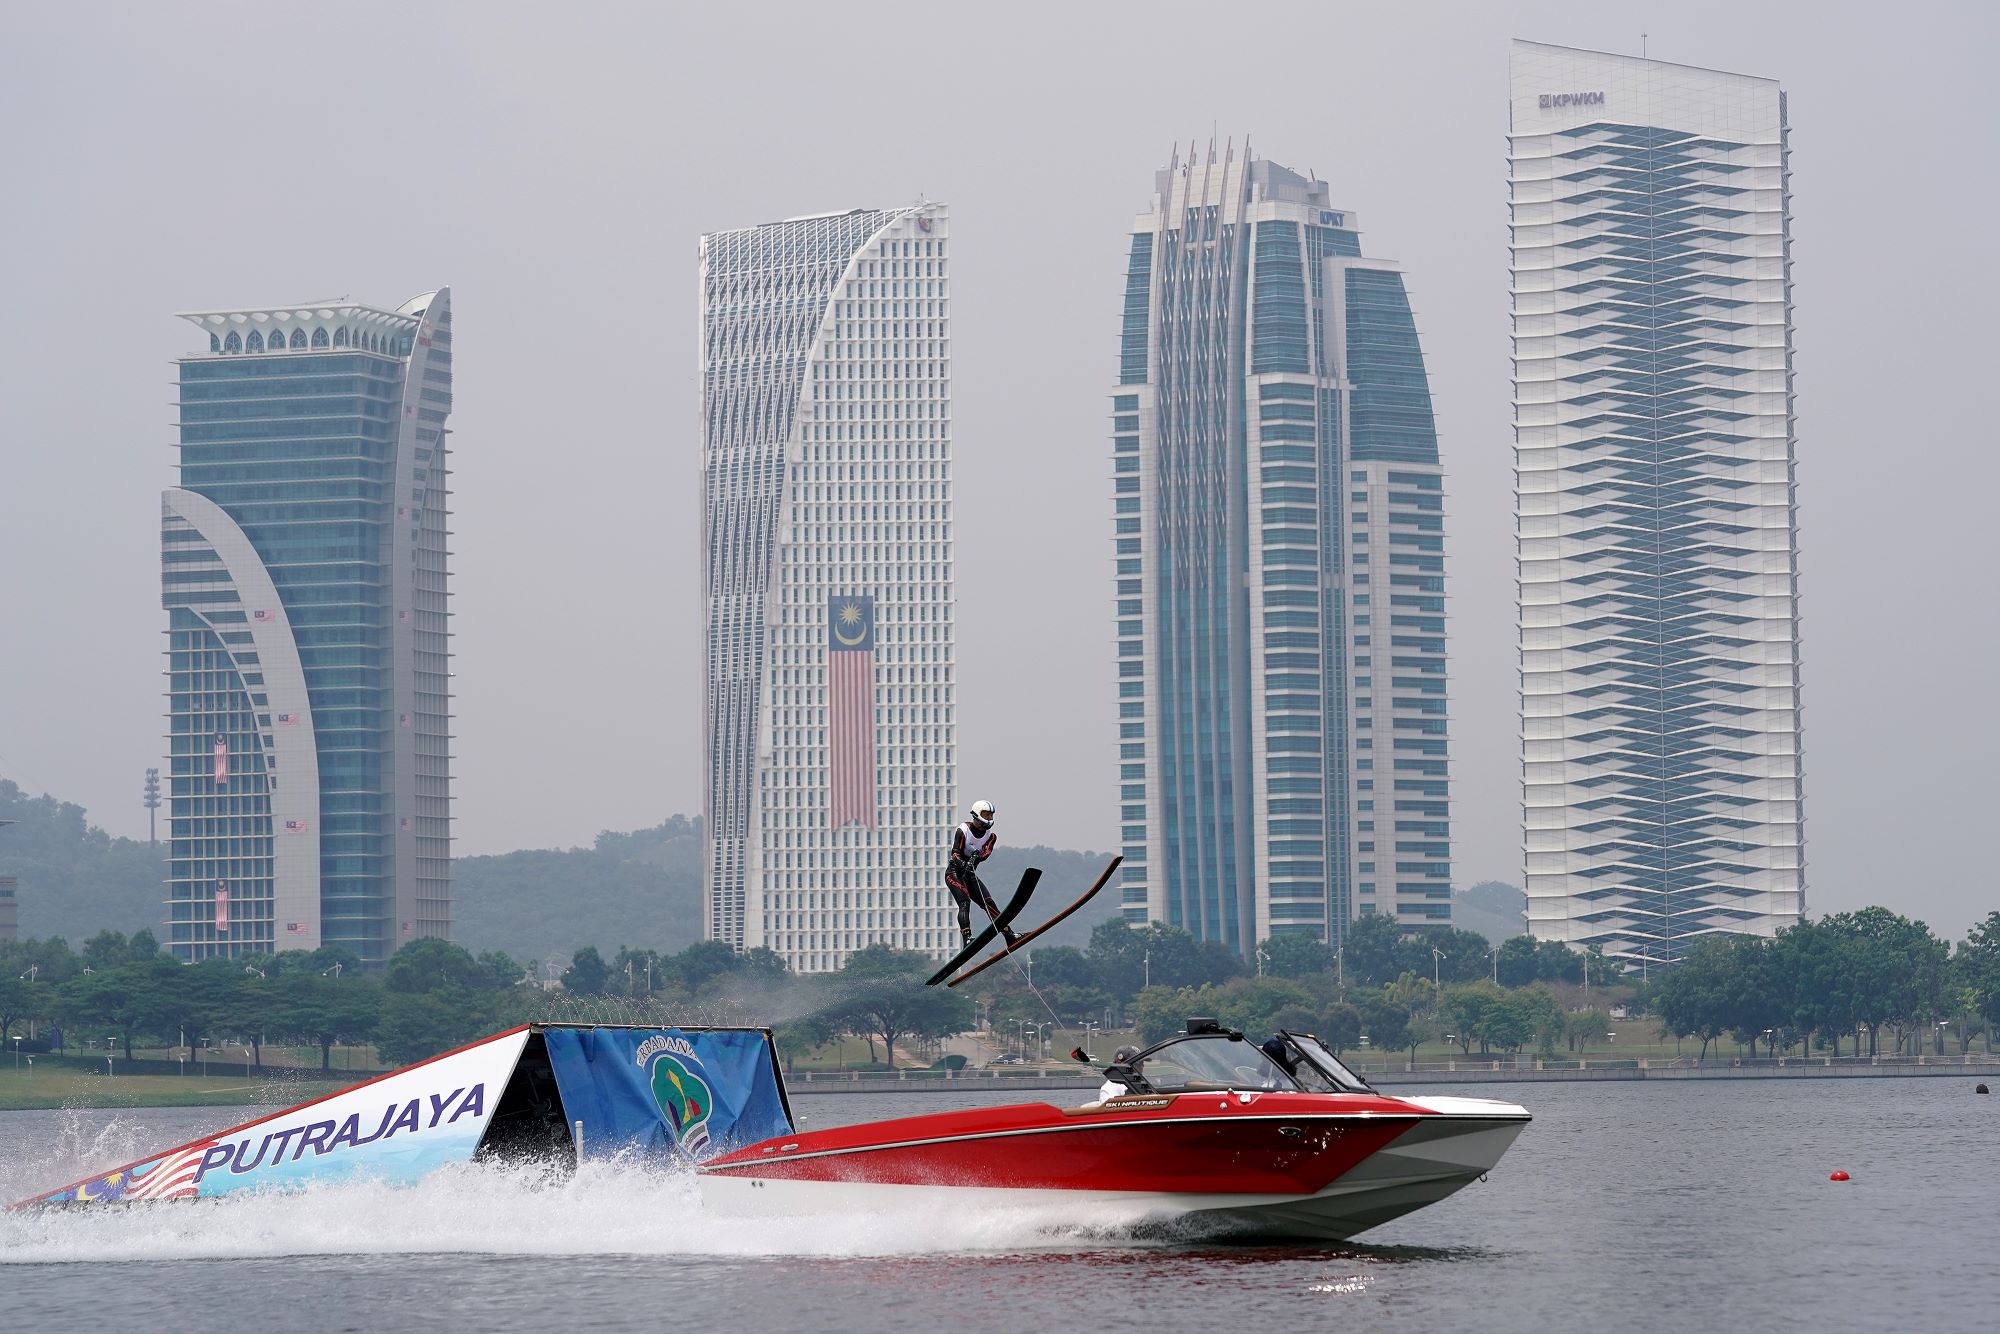 Jet boat on the water with a someone riding skis going up a ramp in front of a city skyline.